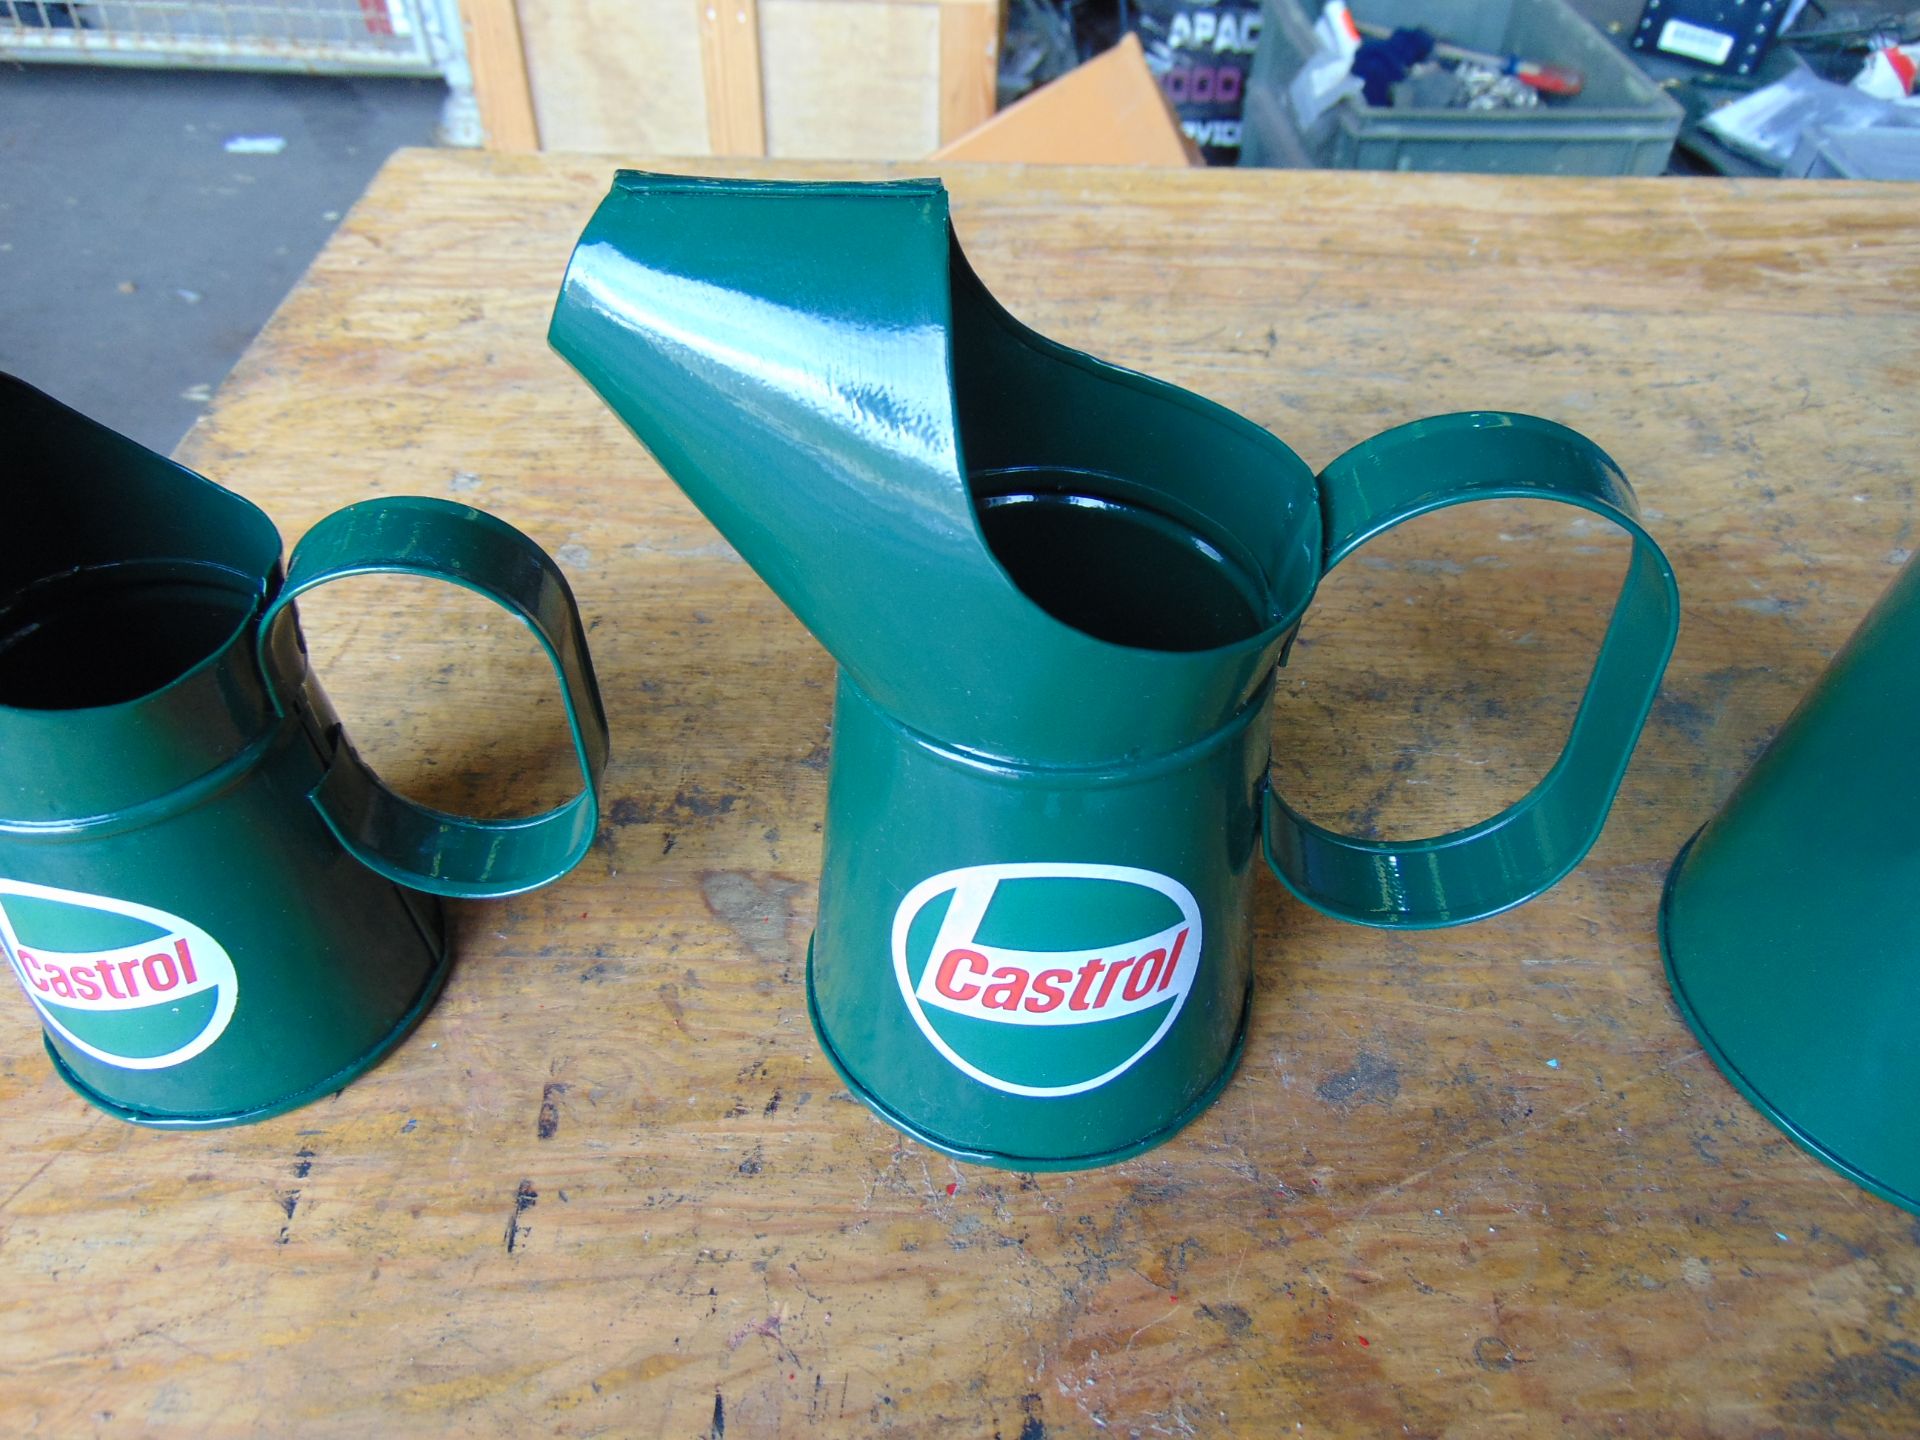 Set of 5 New Unissued Castrol Oil Jugs - Image 5 of 10